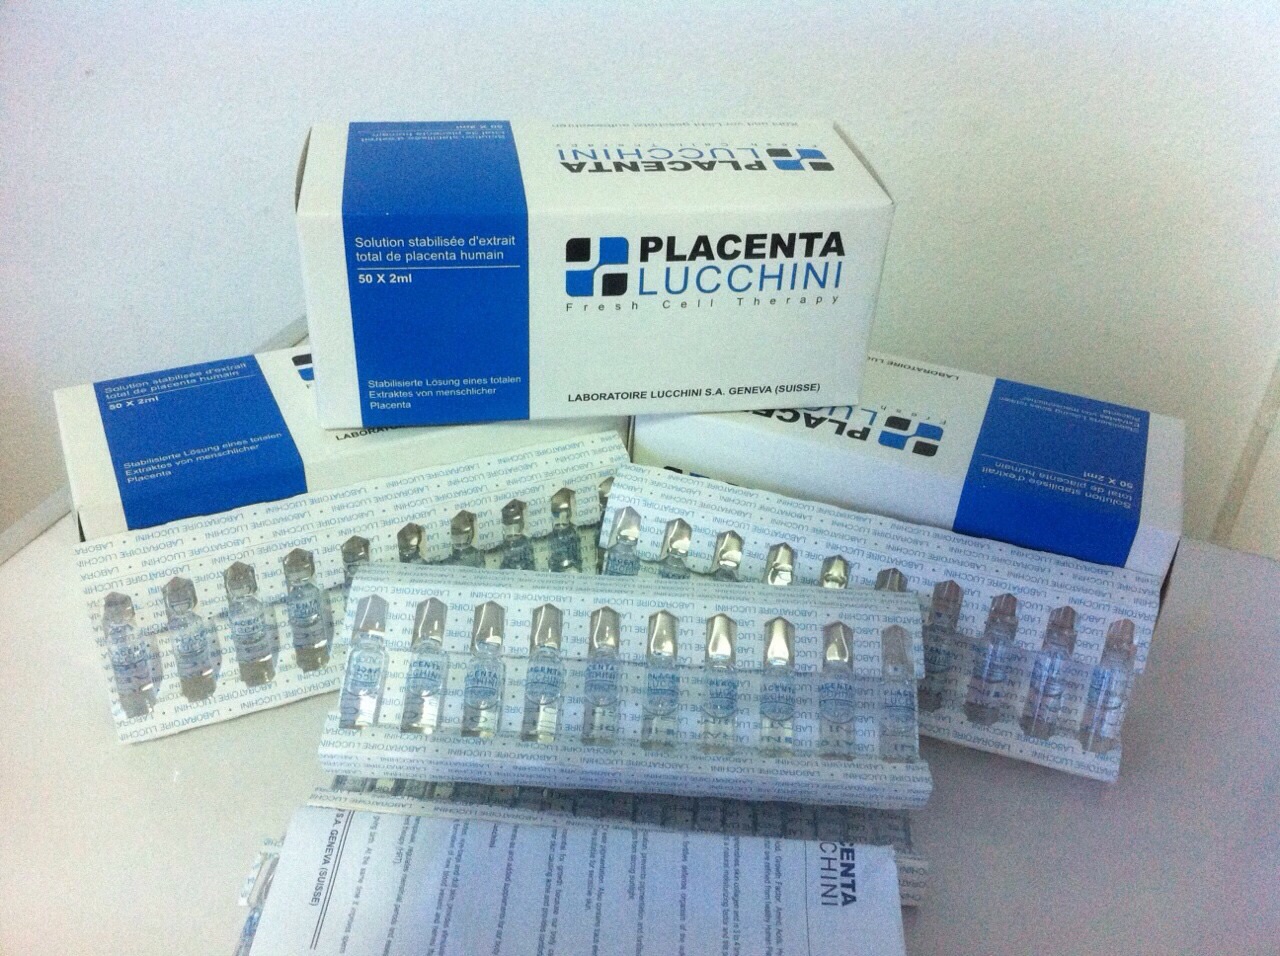 PLACENTA LUCCHINI HUMAN FRESH CELL THERAPY (SWISS) INJECTION by "www.ccthaitown.com"